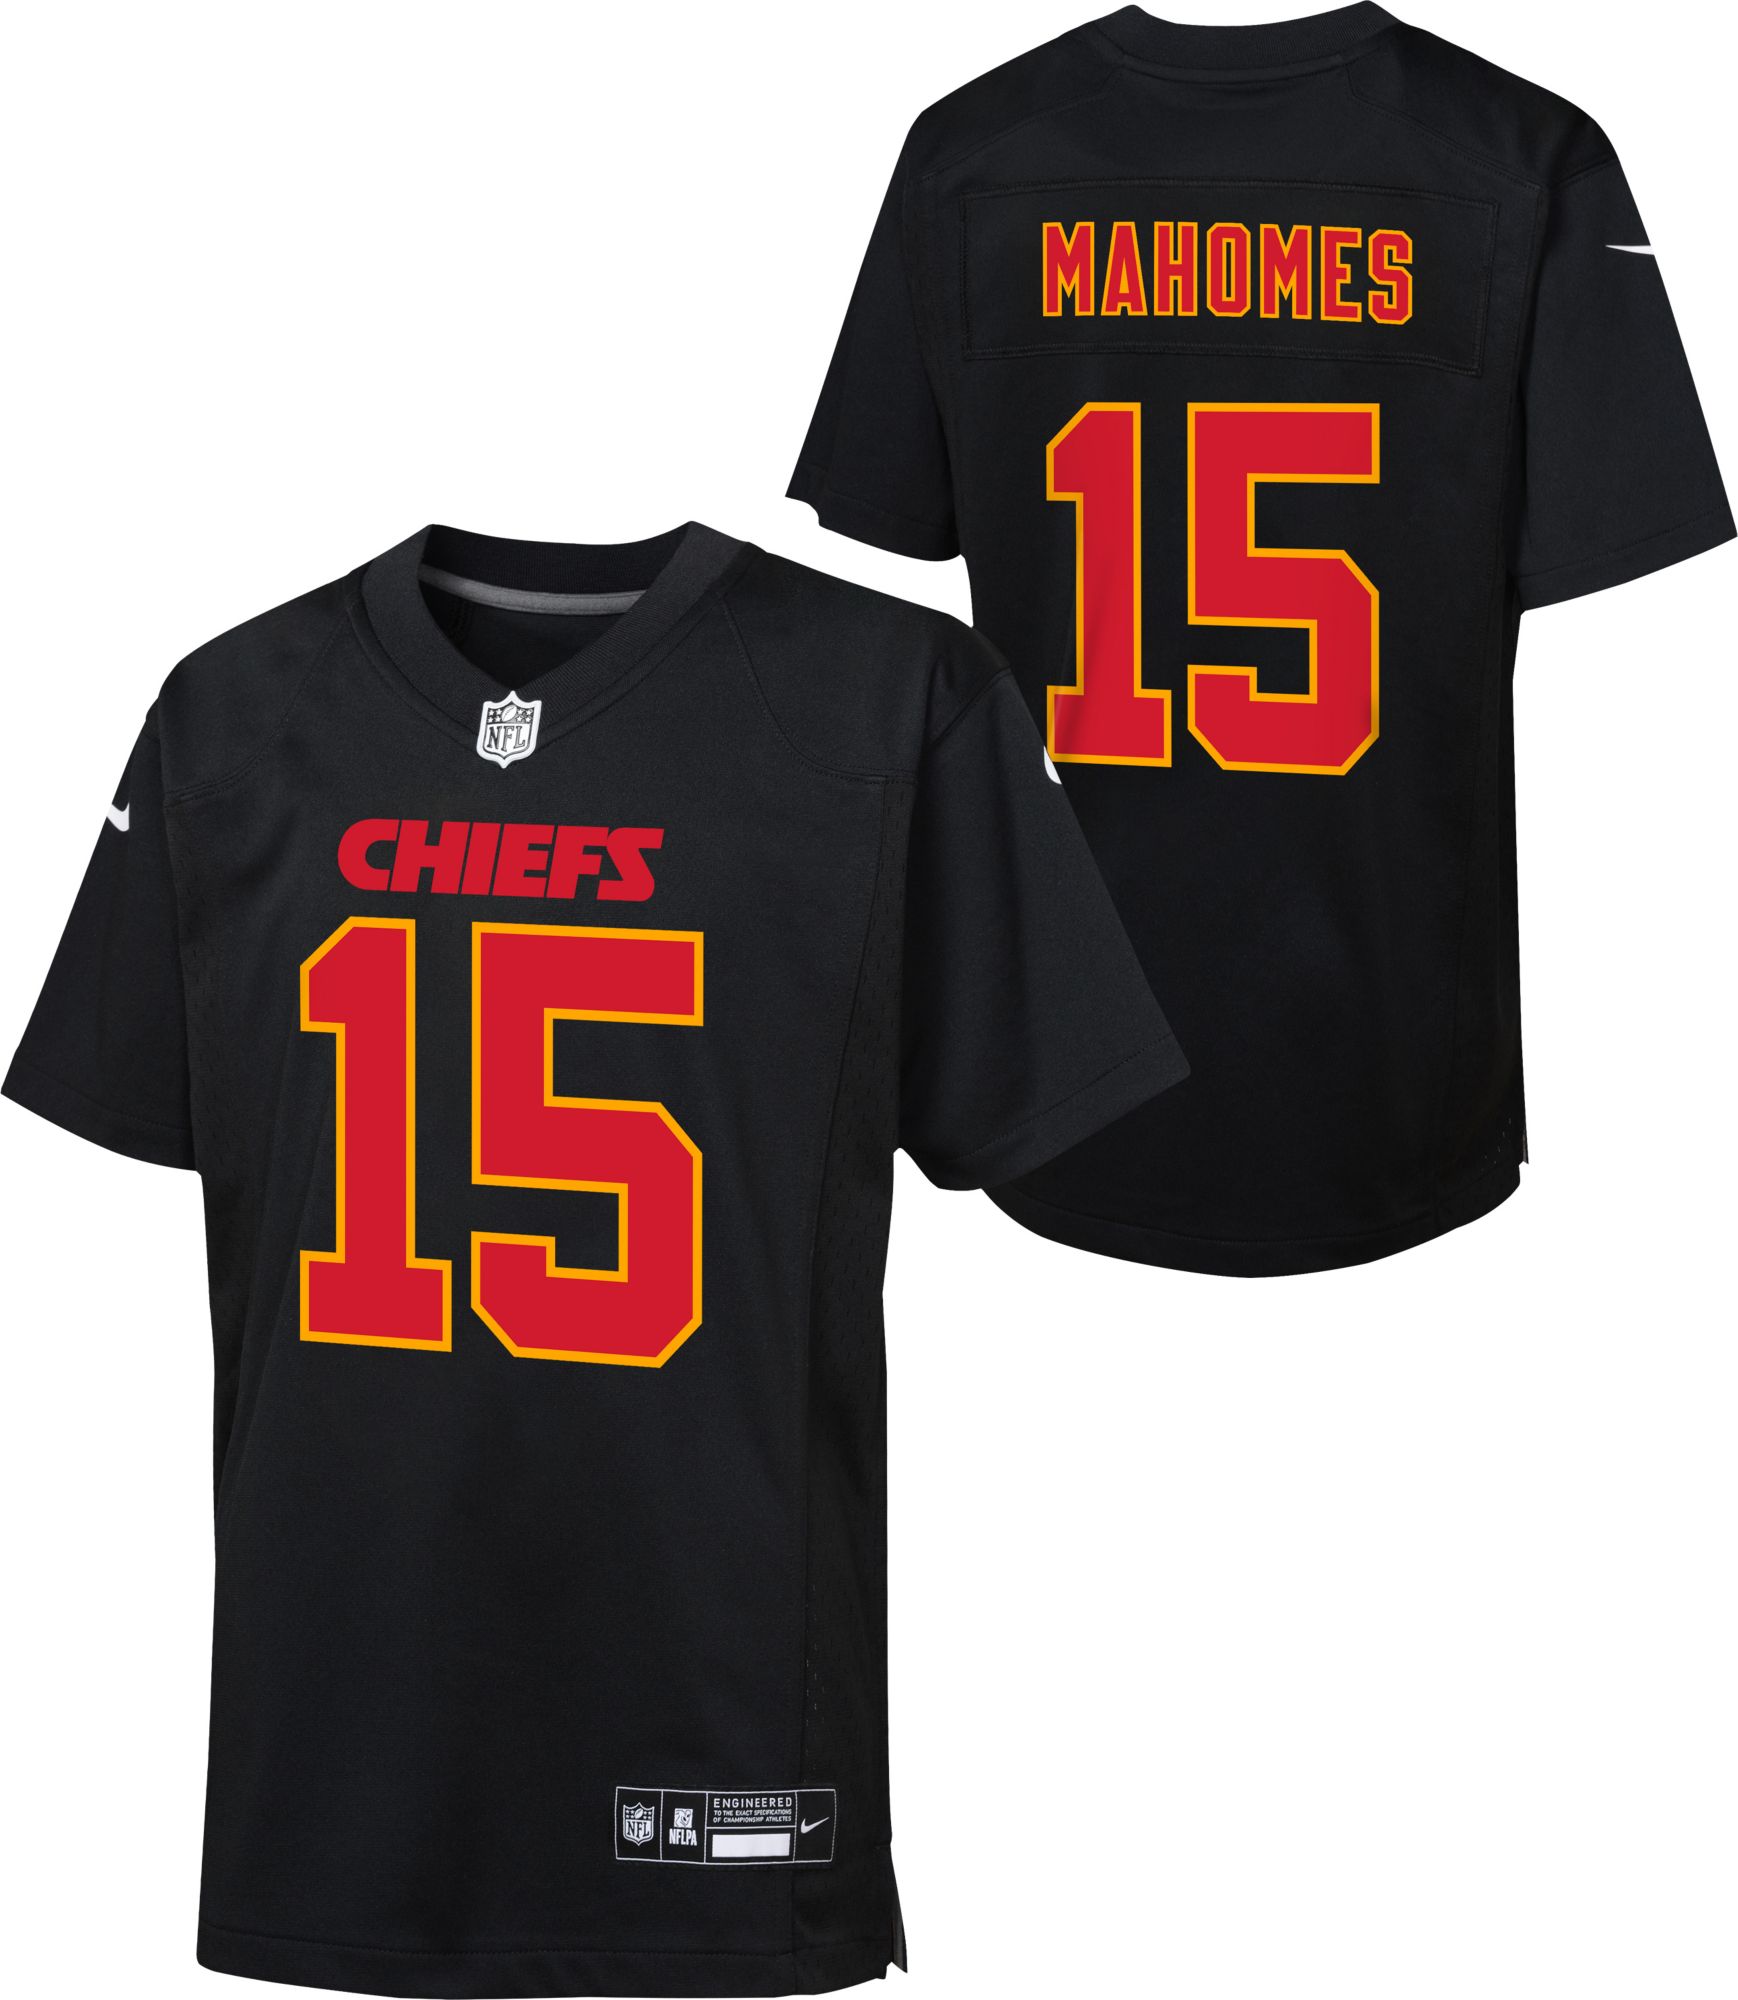 Harris Charles youth jersey